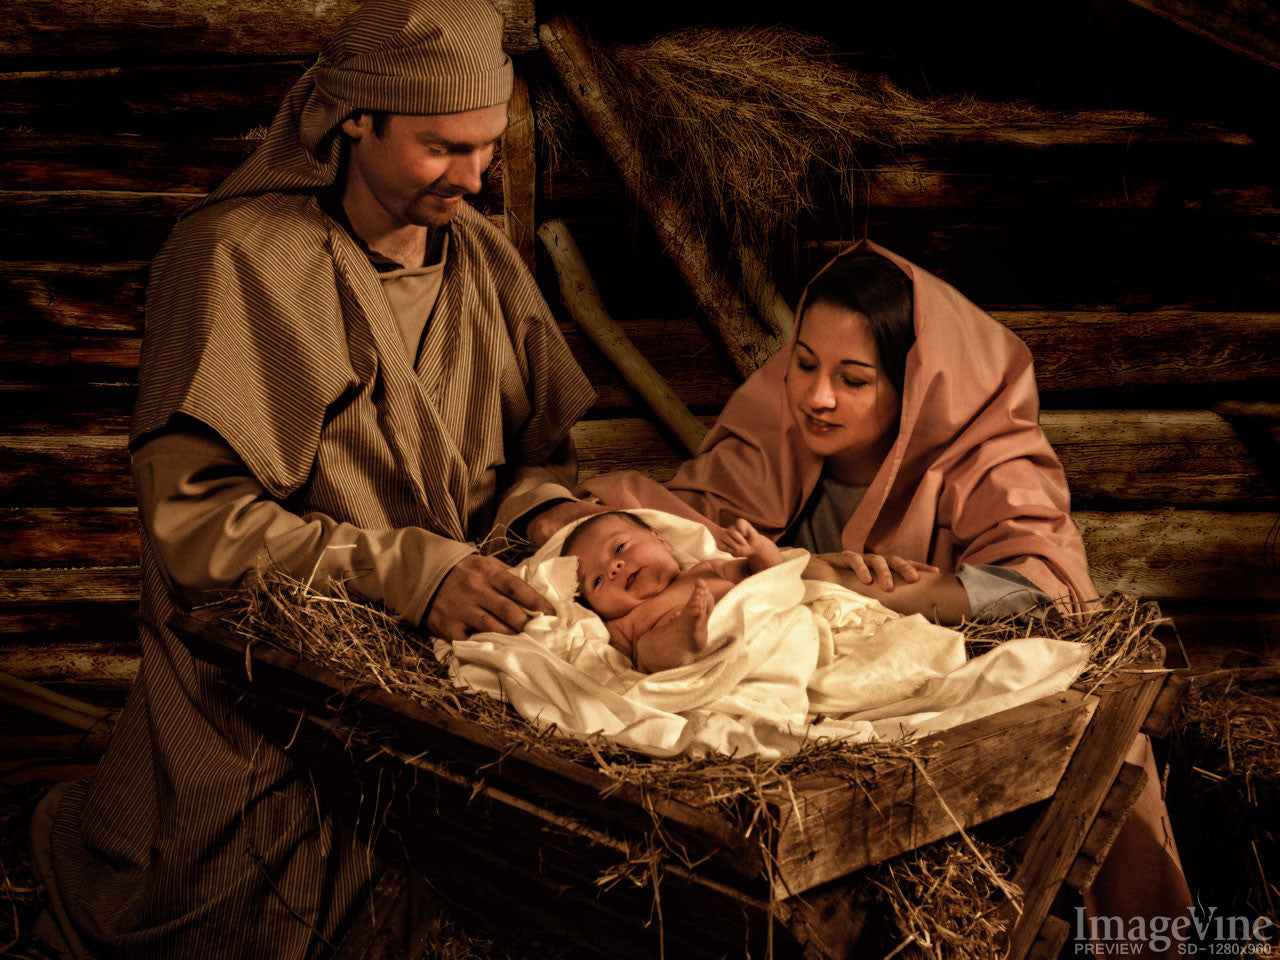 Joseph And Mary From The Bible